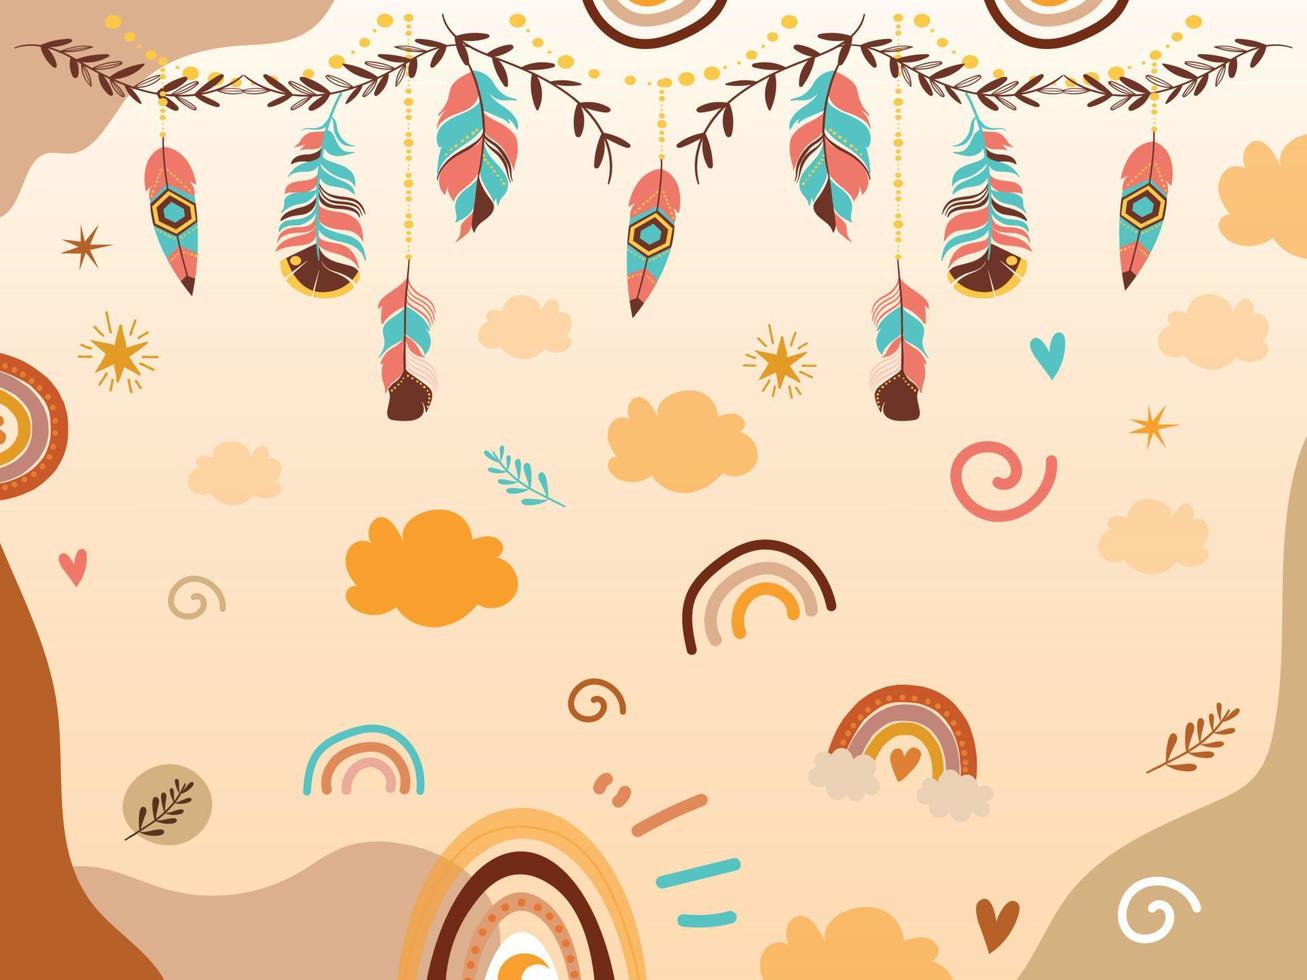 Vector hand drawn of boho clipart decoration with cute rainbow, moon, stars, clouds. Doodle modern illustration that suitable for birthdays, kids parties, wrapping, fabric, etc